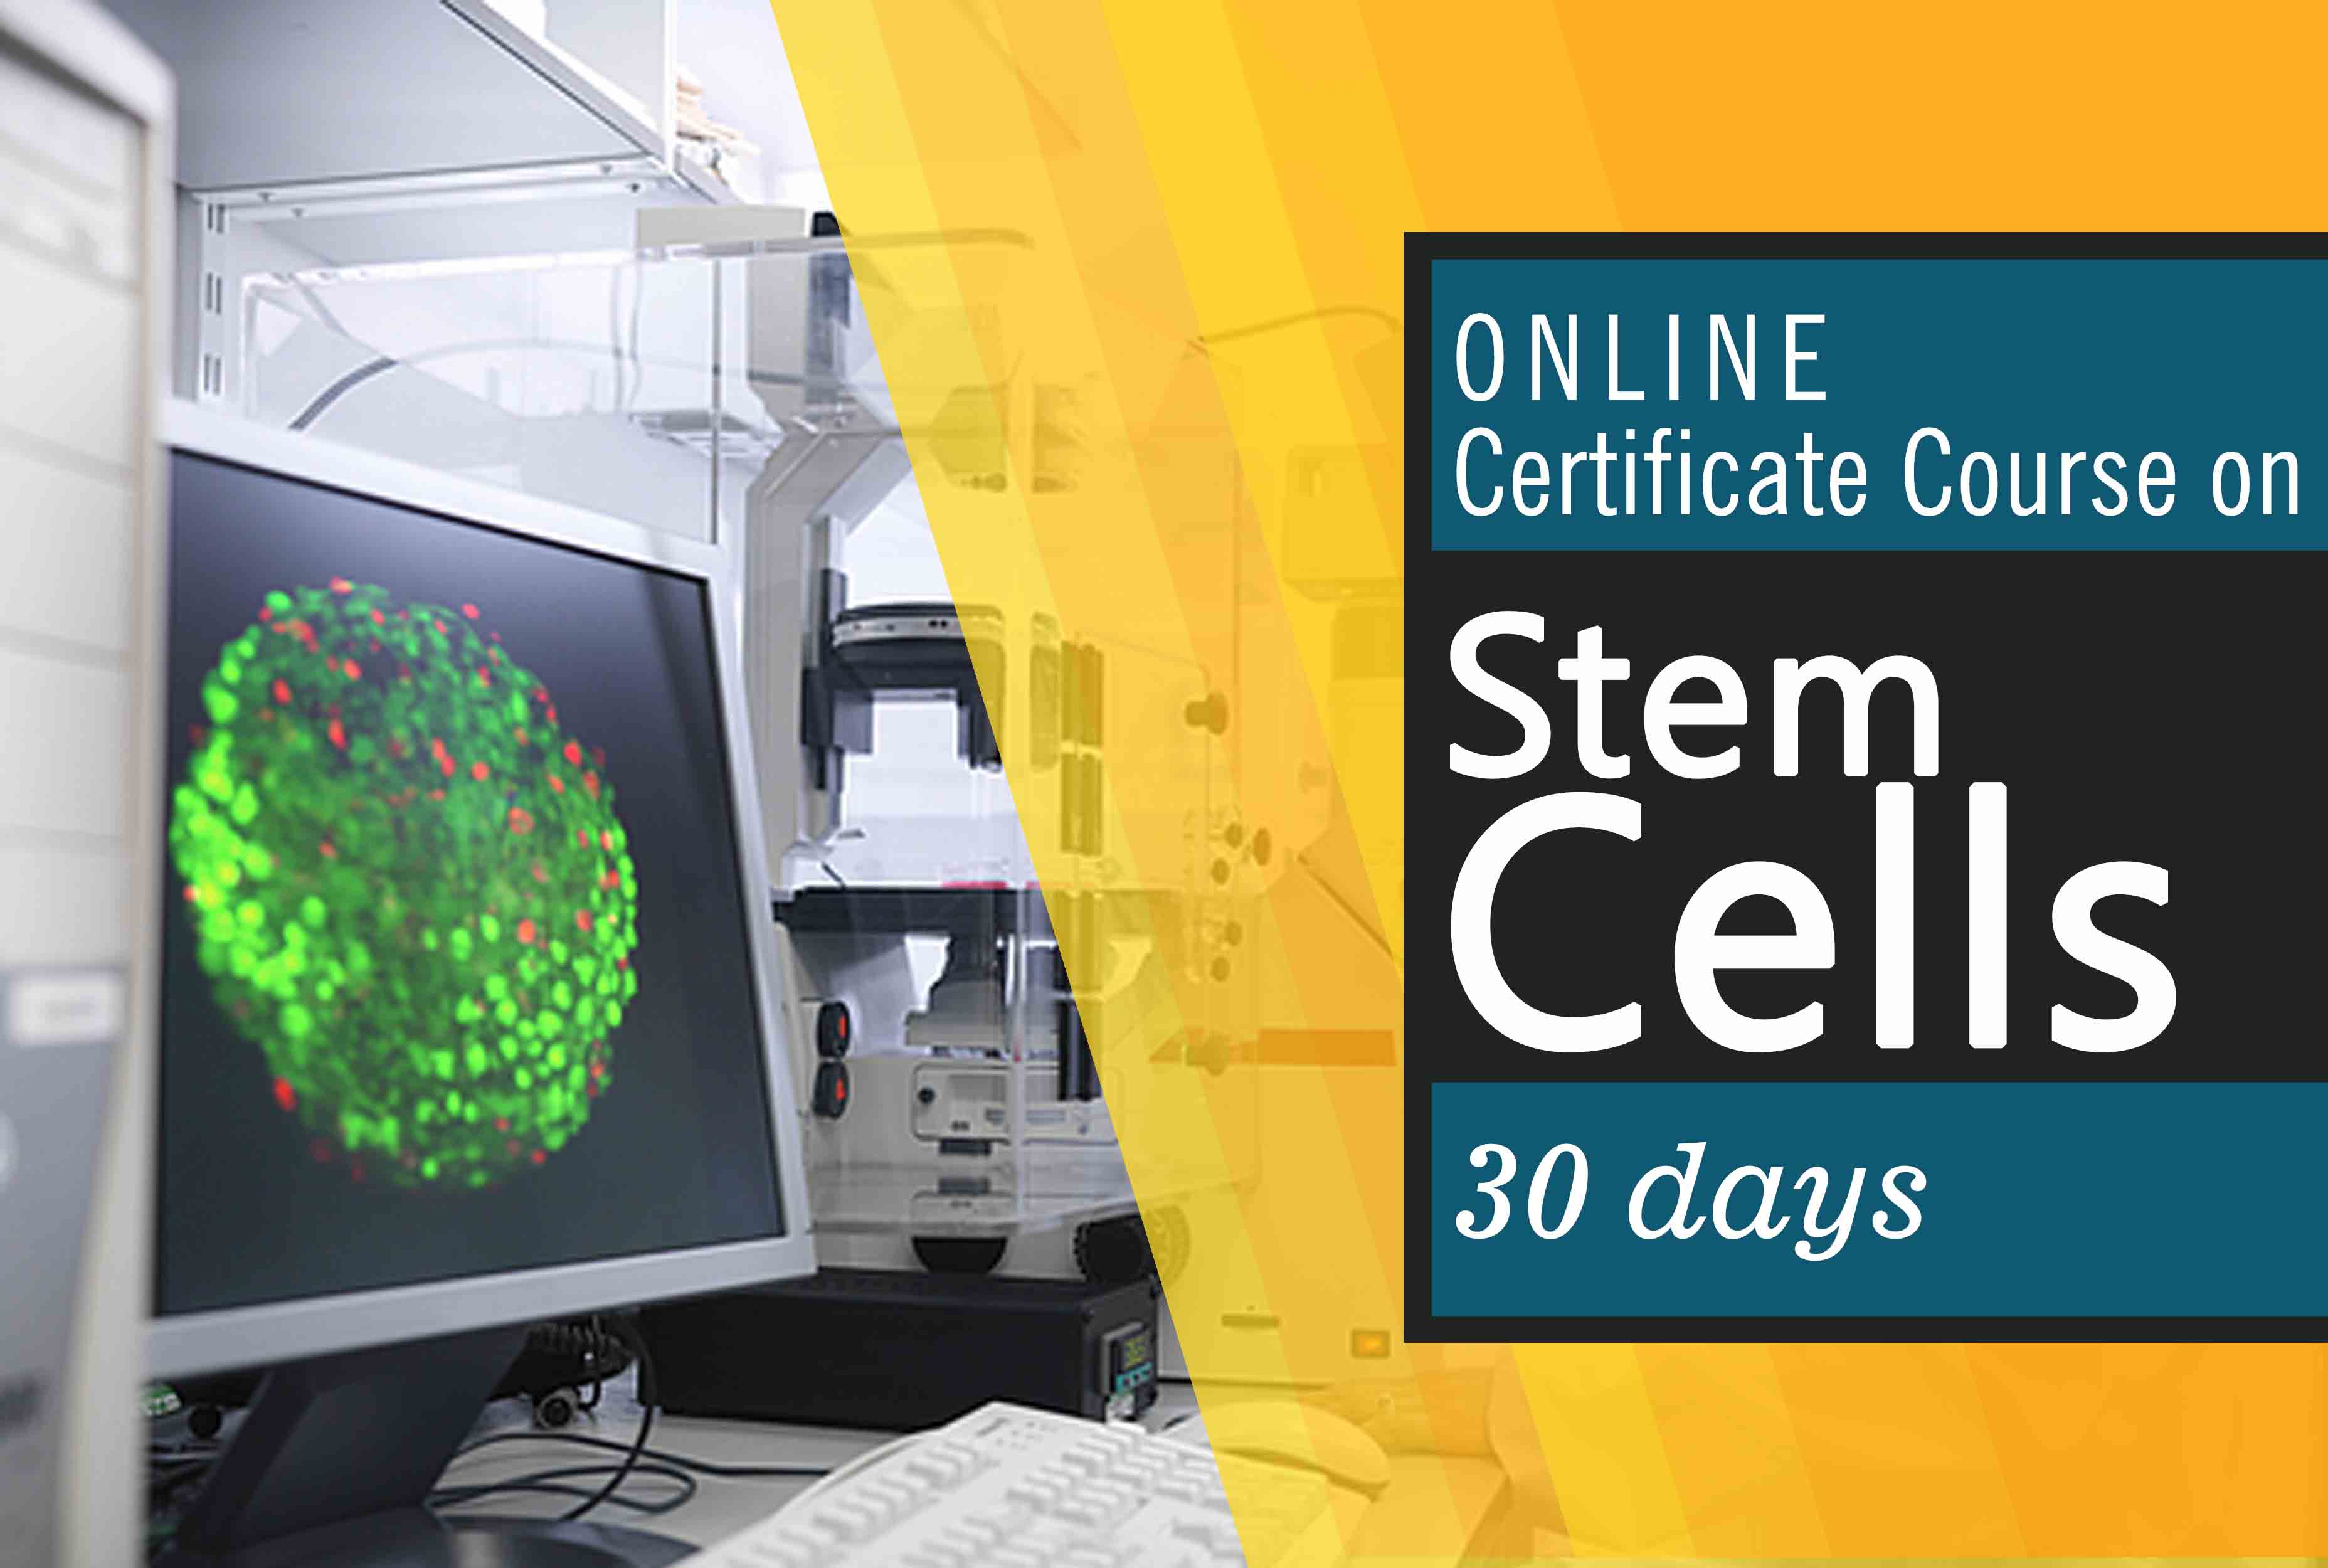 Certificate course on stem cells